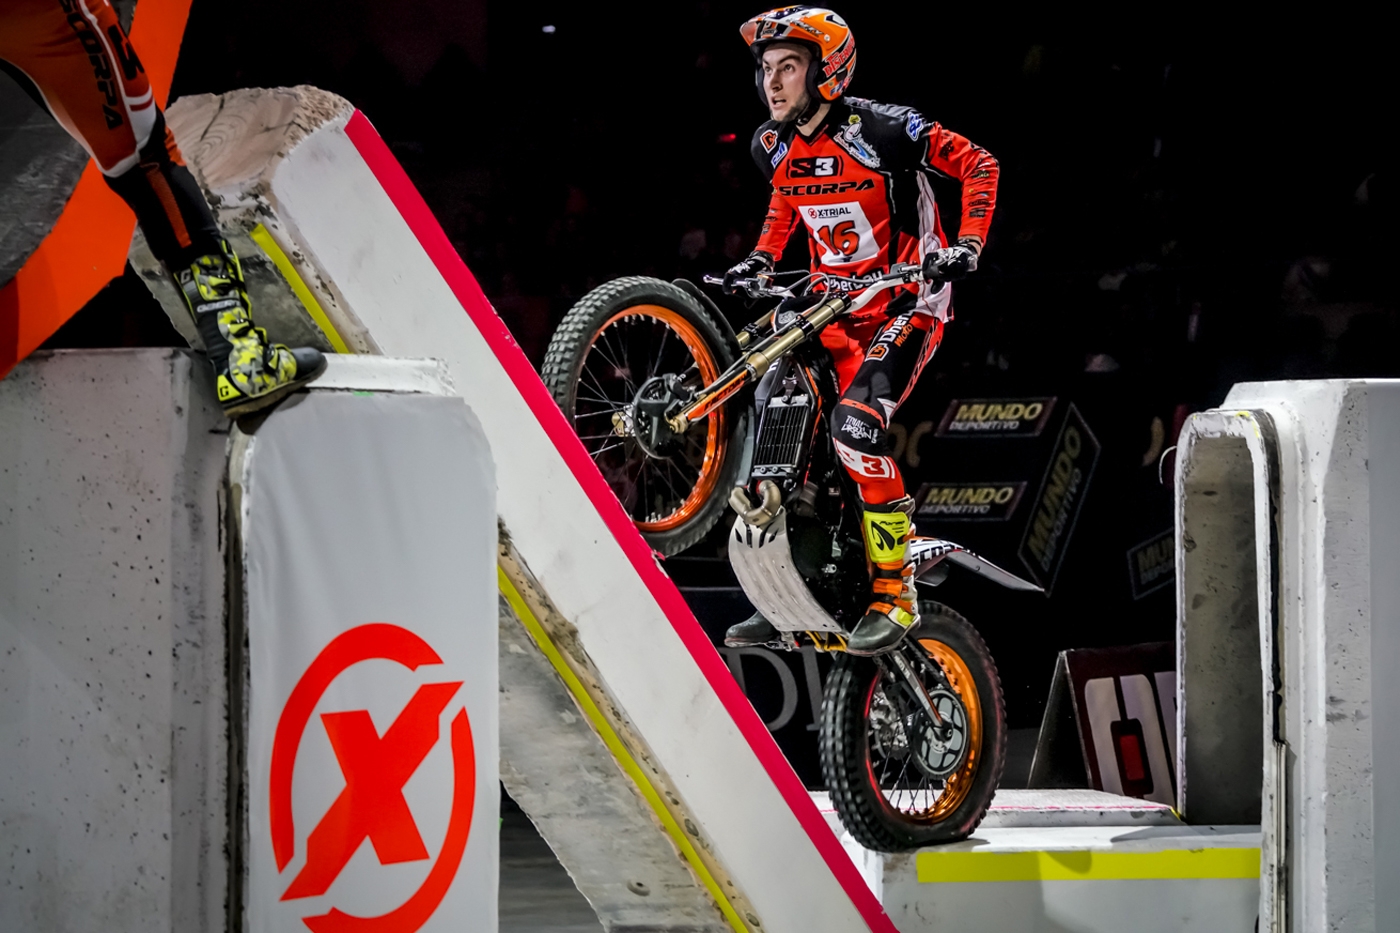 Marseille returns to the X-Trial World Championship